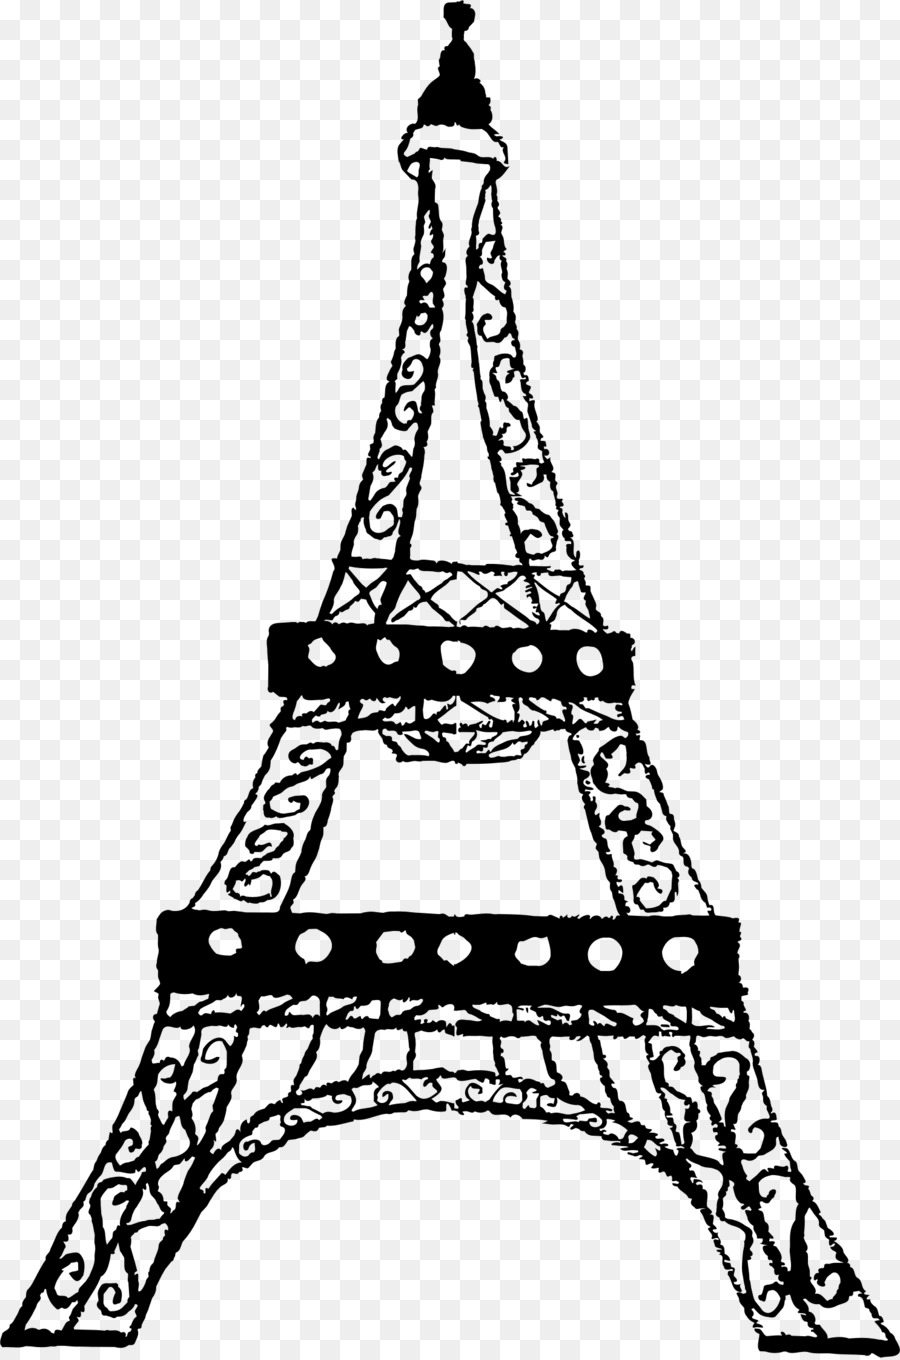 Eiffel Tower Drawing Clip art - Eiffel Tower PNG Transparent png download - 1486*2242 - Free Transparent Eiffel Tower png Download.